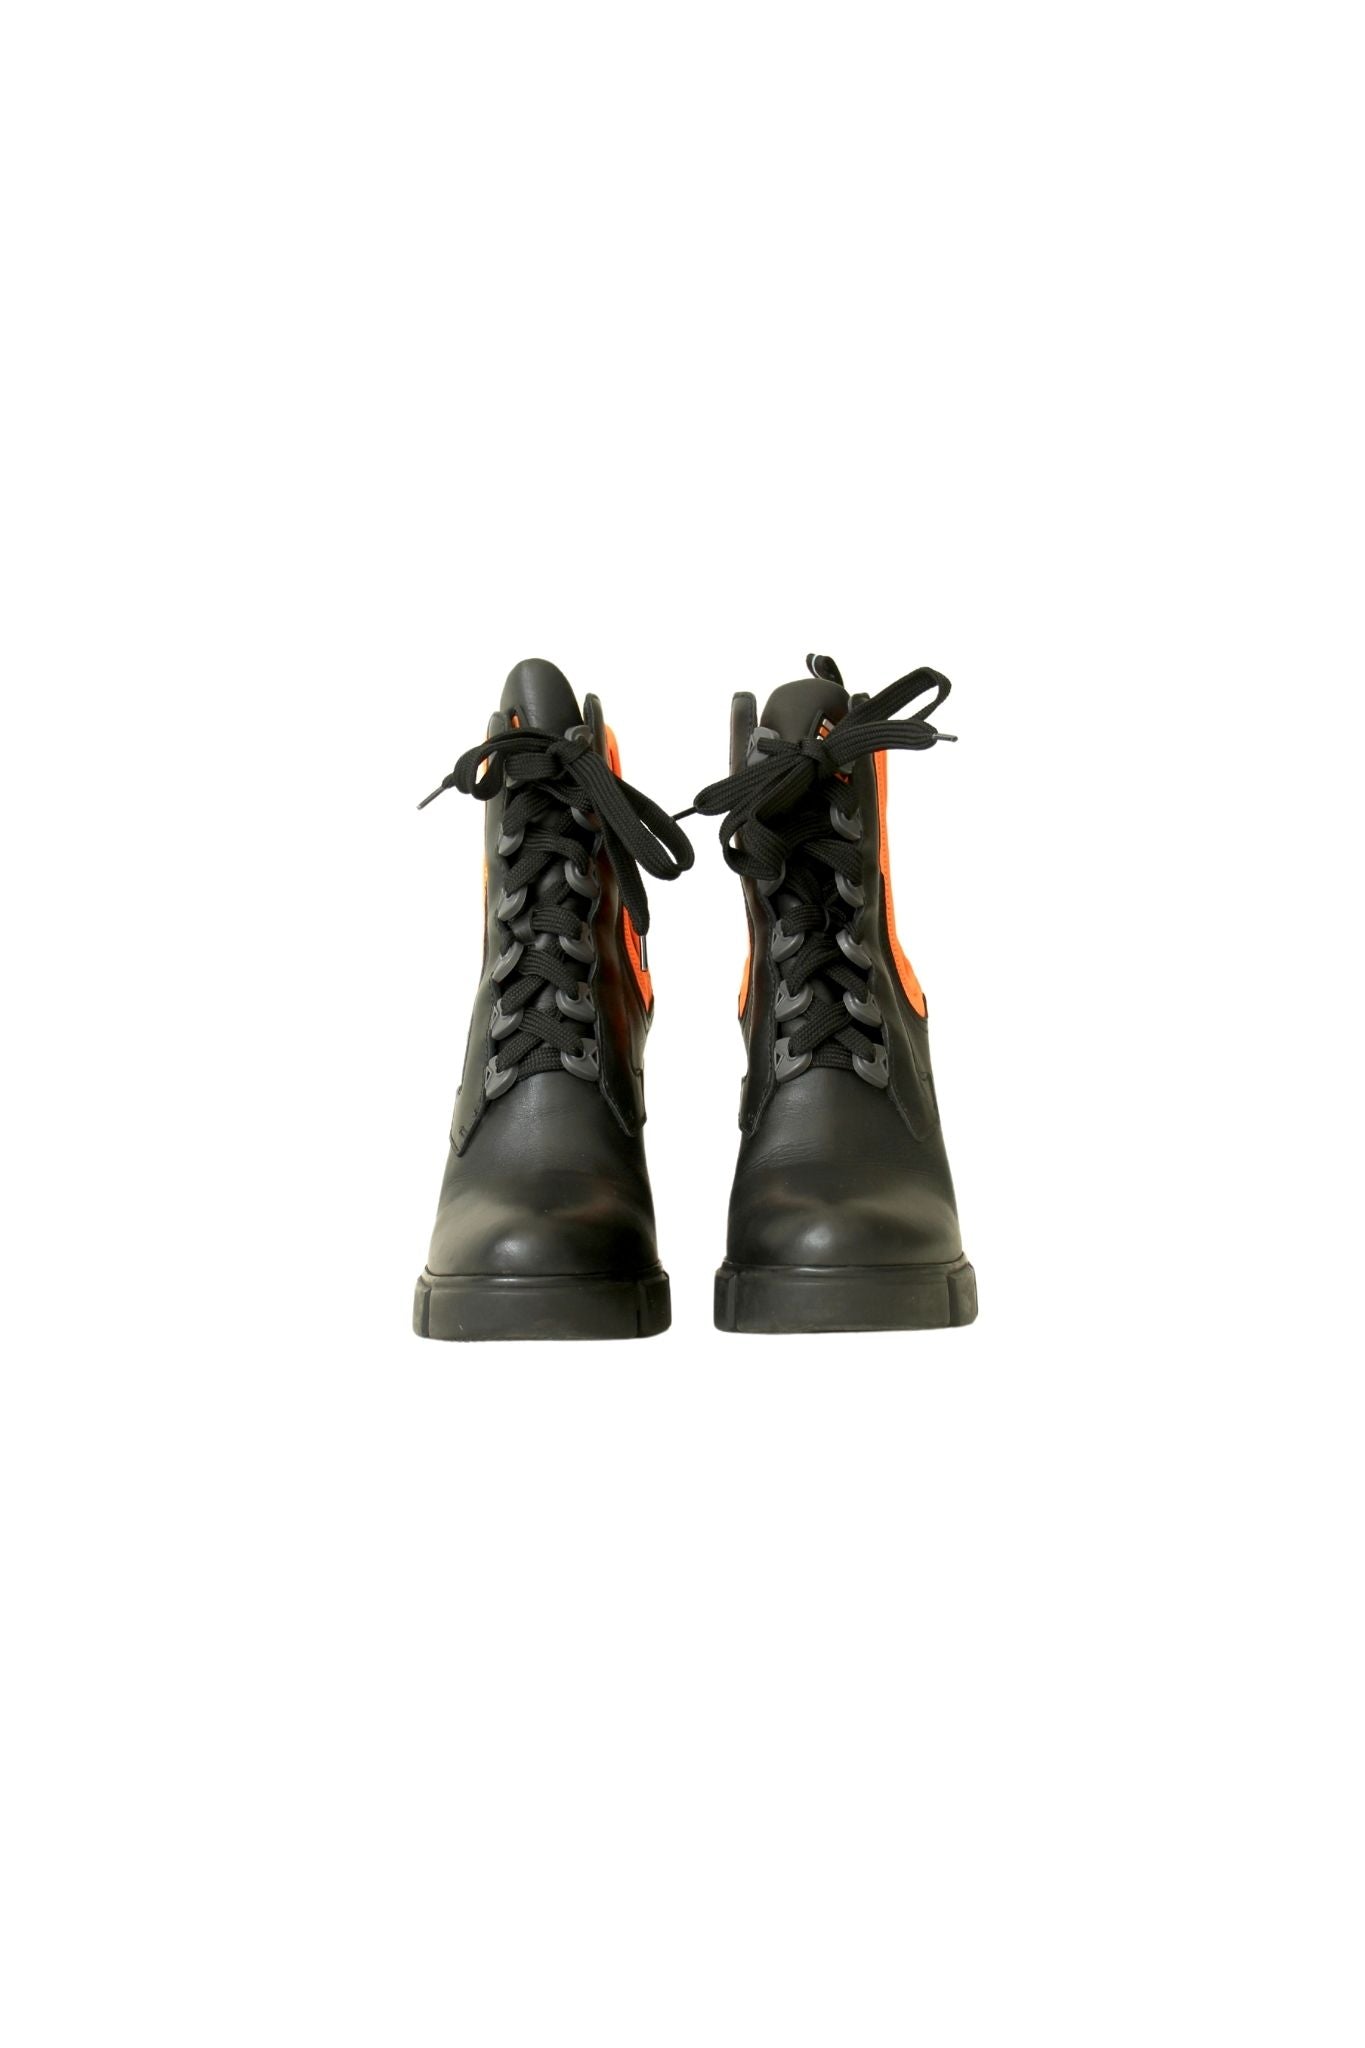 Black and Neon Orange Lace-up Ankle Boots